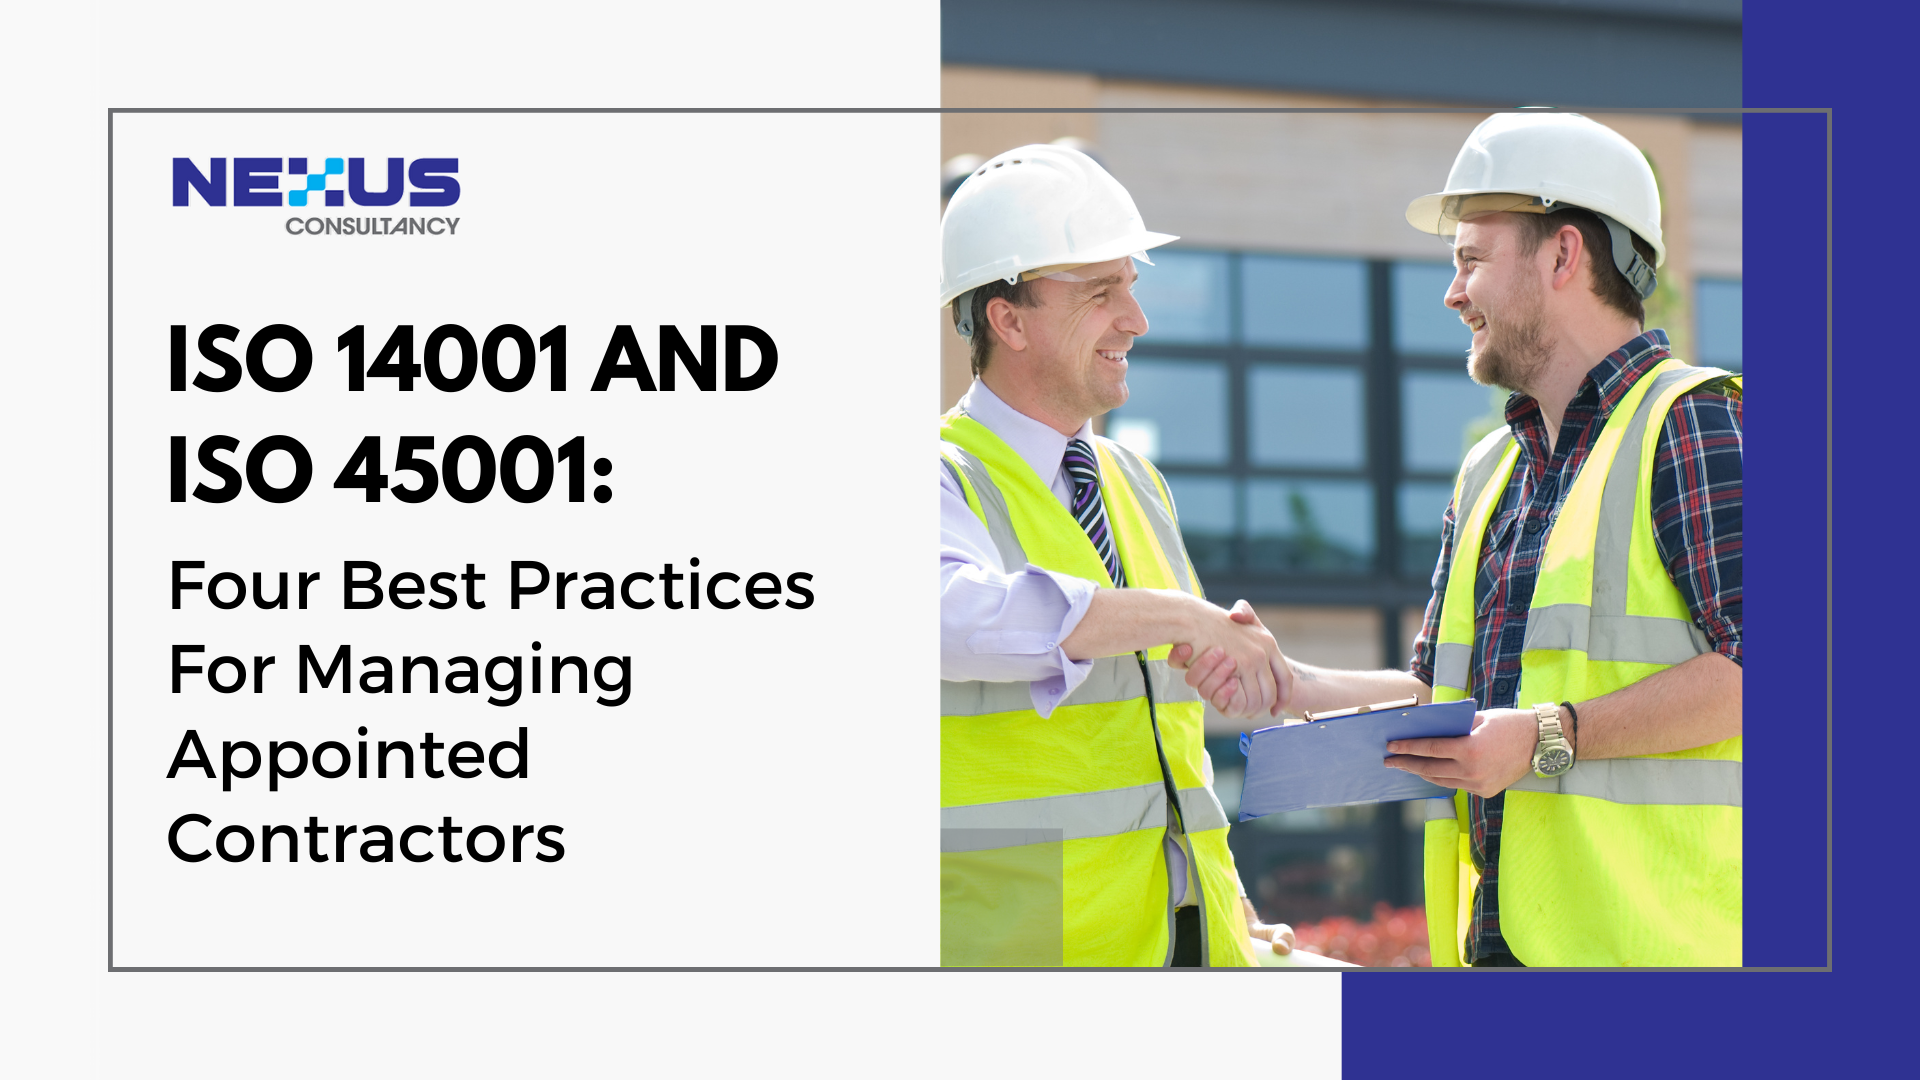 ISO 14001 and ISO 45001: Four Best Practices For Managing Appointed Contractors